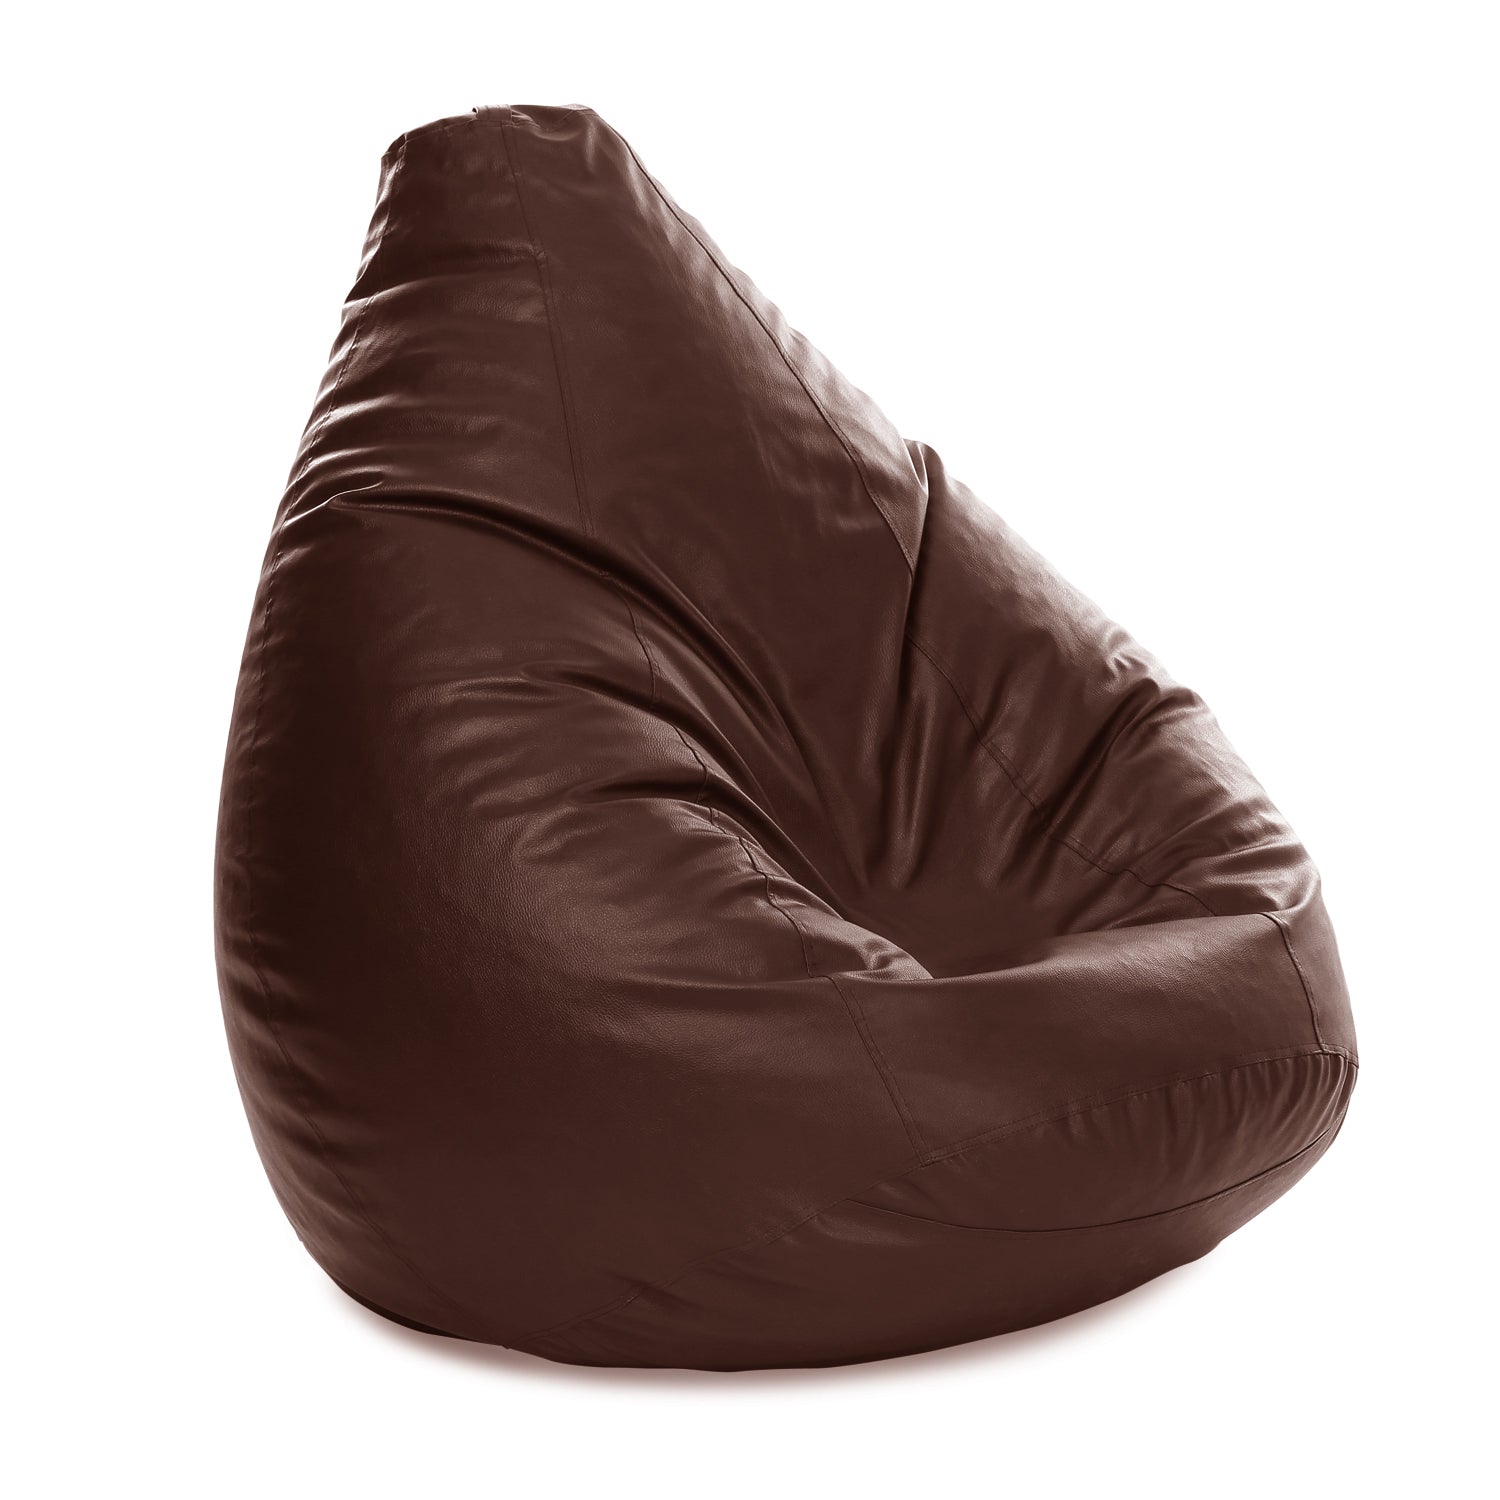 Buy Luxe Decora Classic Round Faux Leather Bean Bag with